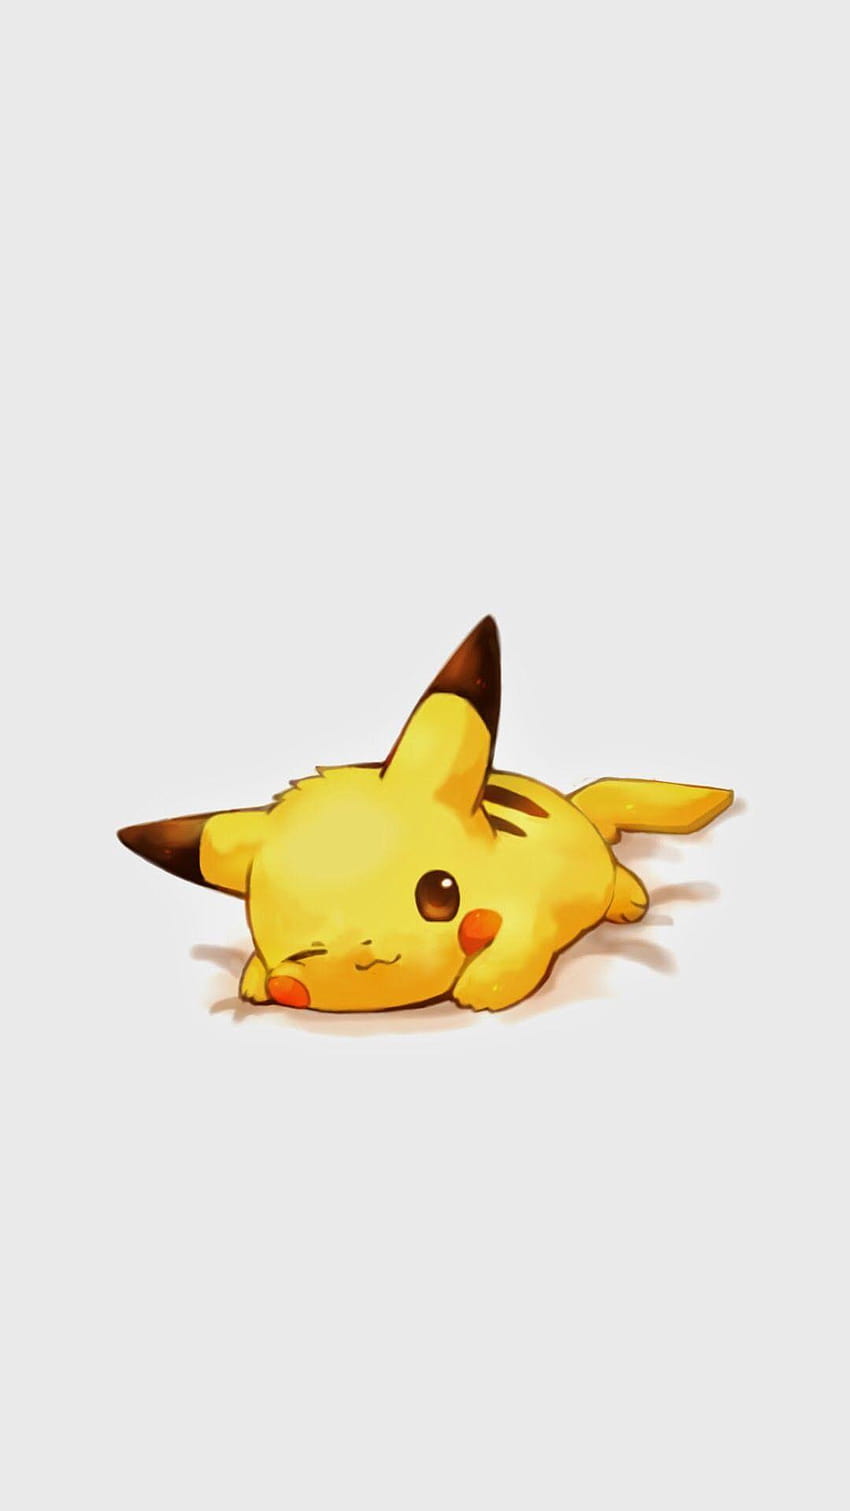 Tap for more funny cute Pikachu ! Pikachu, eevee and pikachu HD ...